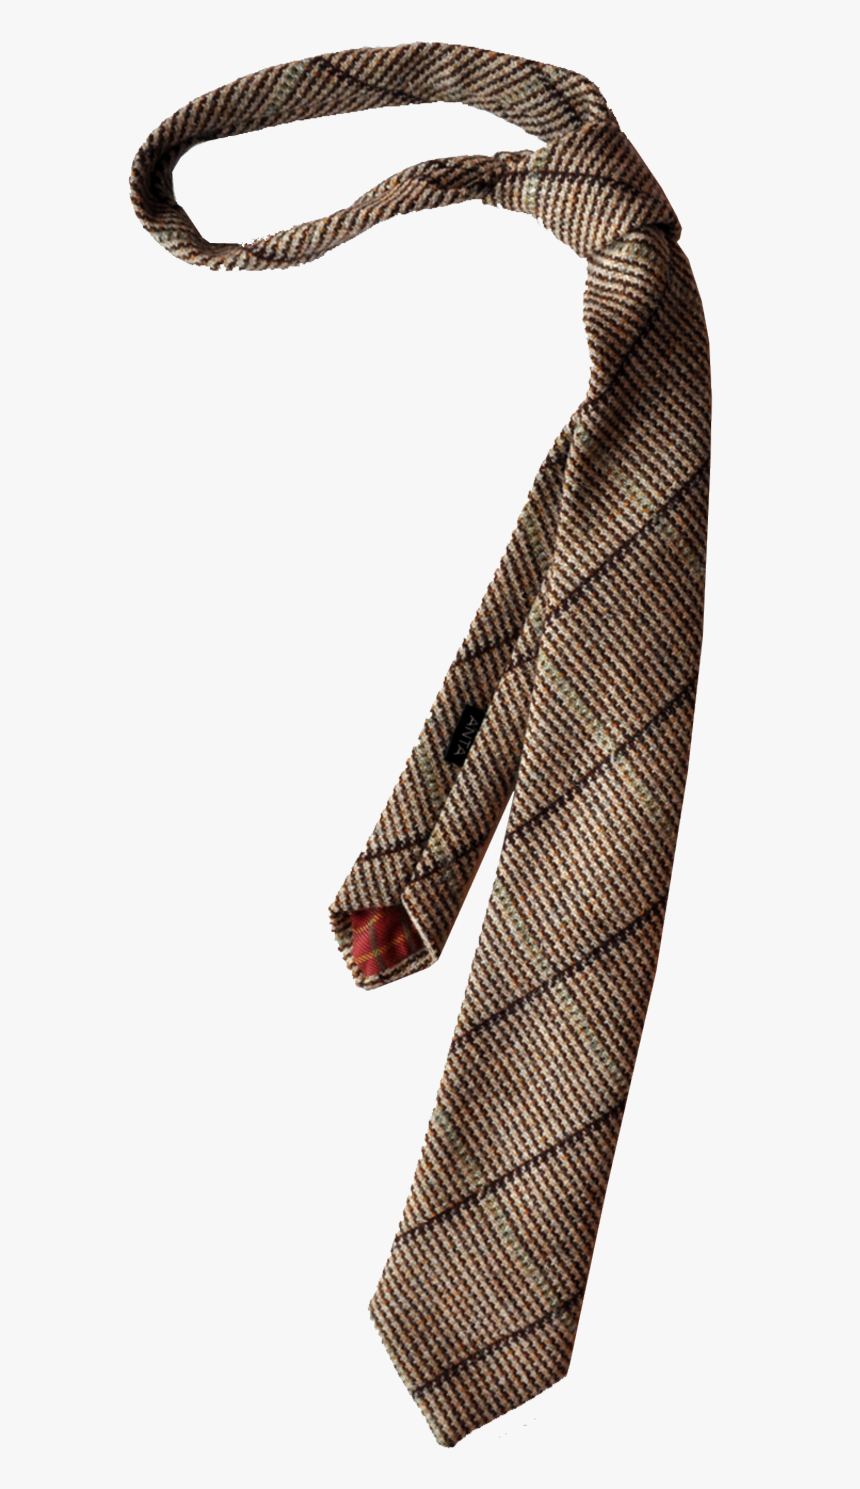 Tie Png Image - Tie Png, Transparent Png, Free Download